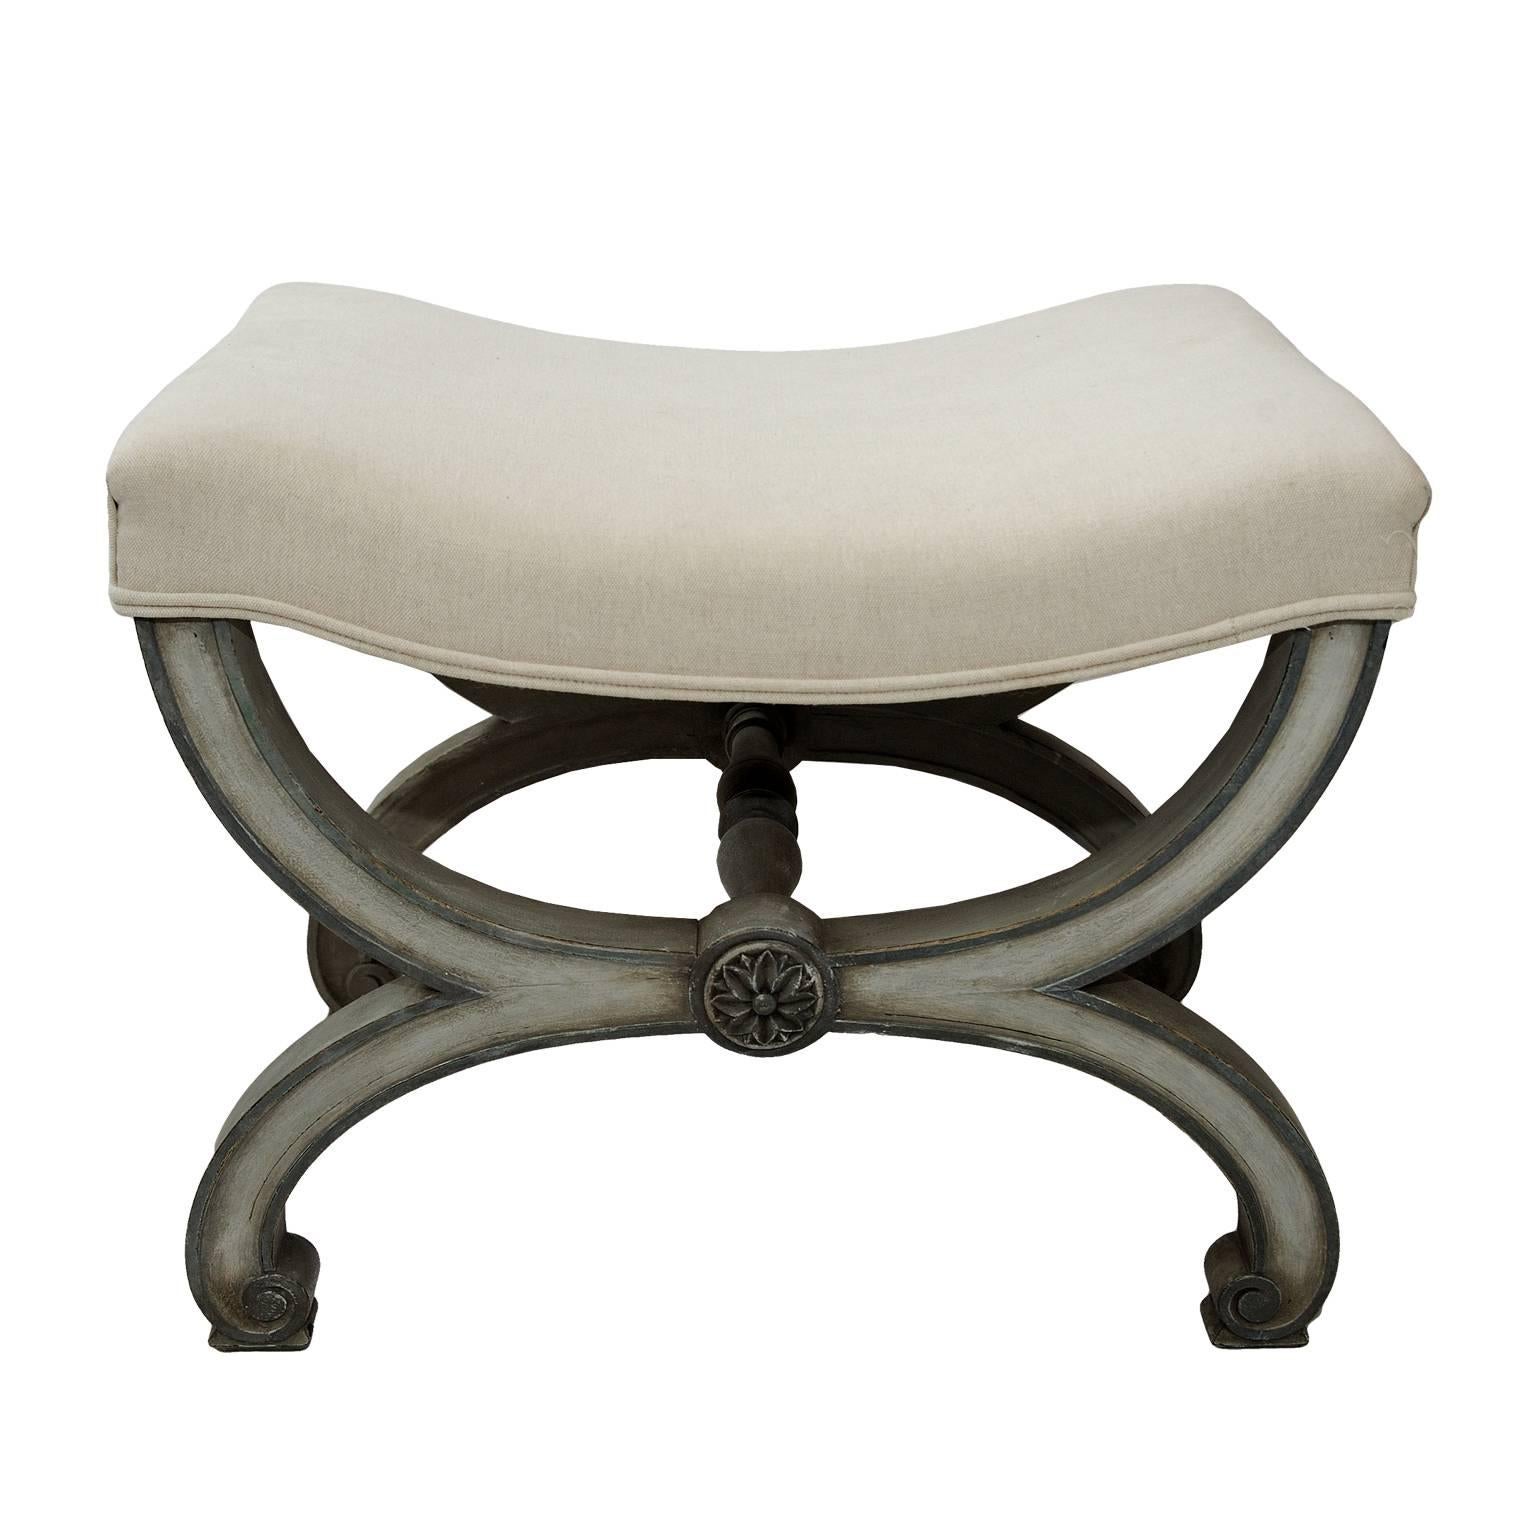 This is a very pretty Louis XVI style, painted X-frame stool, upholstered in cream Scottish Linen, circa 1860 

The X-frame is beautifully detailed with a central carved flower design and the painted frame and cream linen make for a most striking